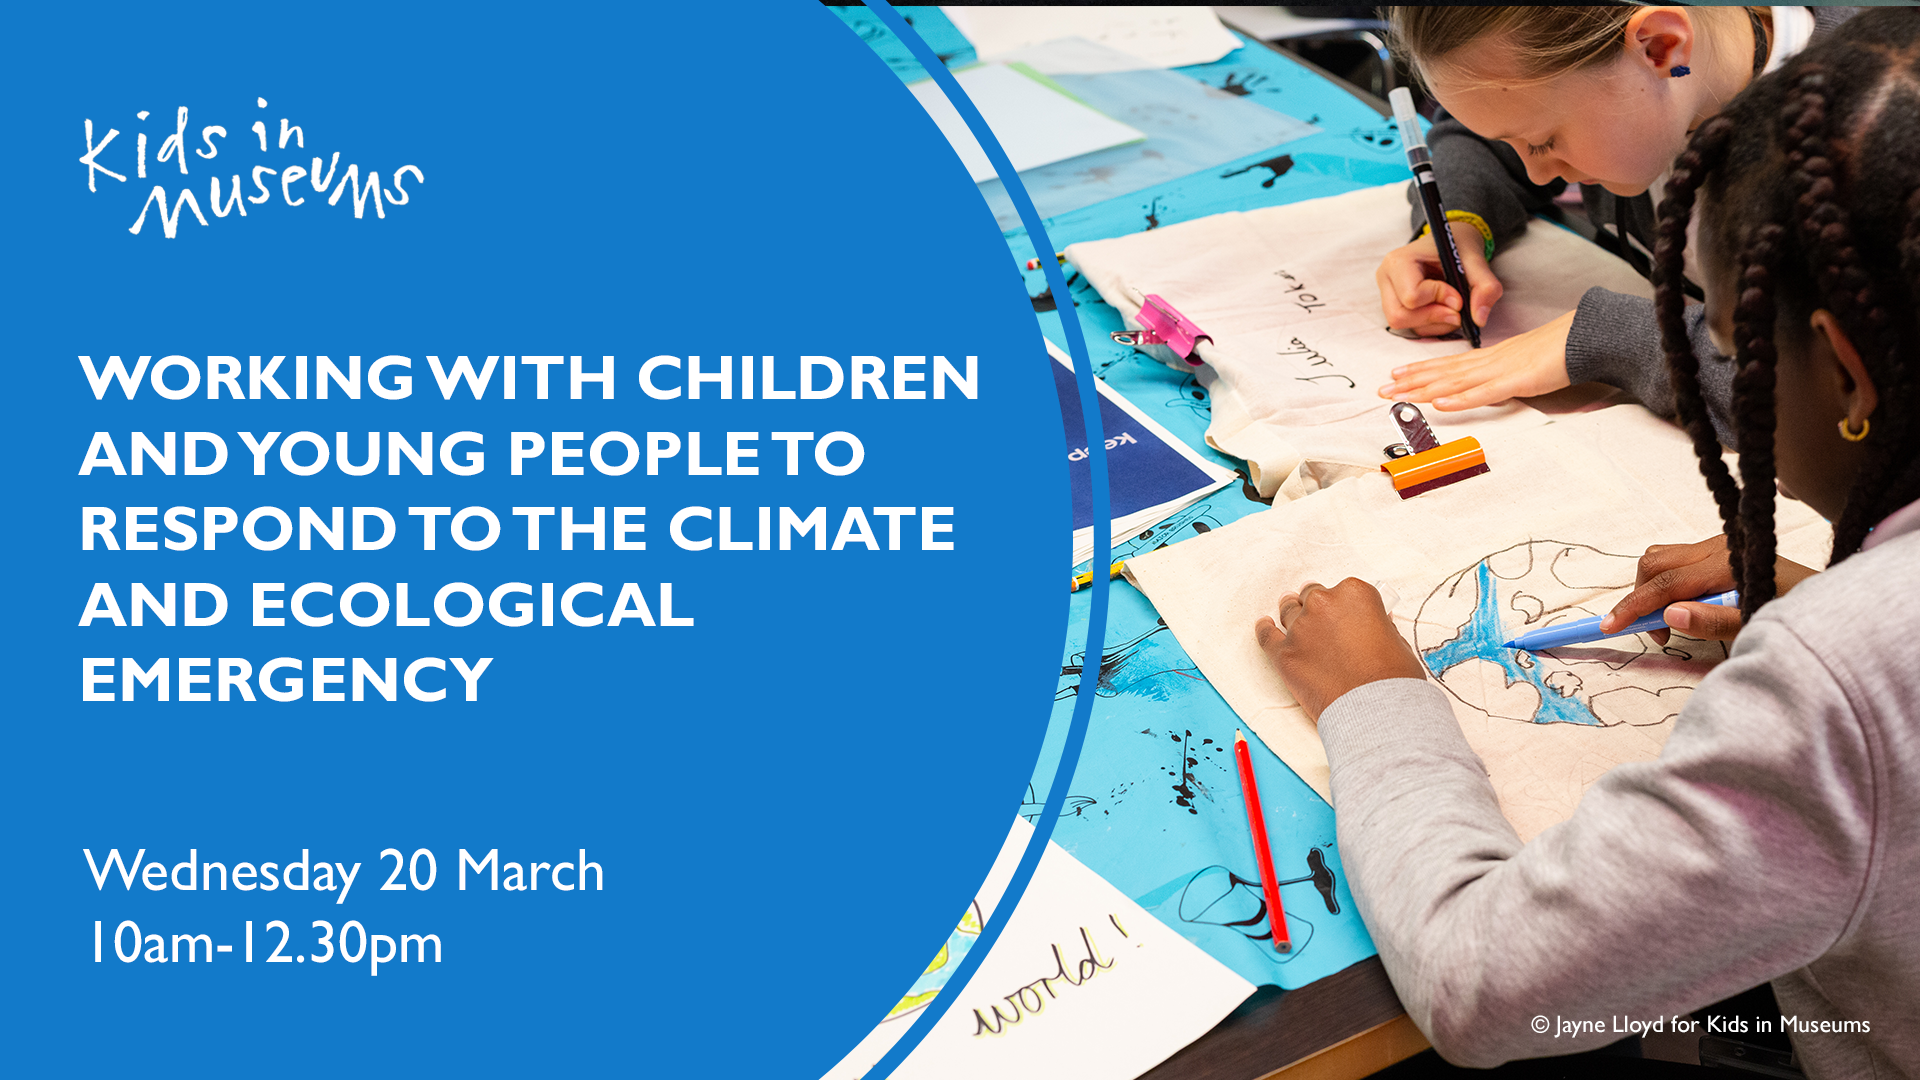 RECORDING: Working with Children and Young People to Respond to the Climate and Ecological Emergency